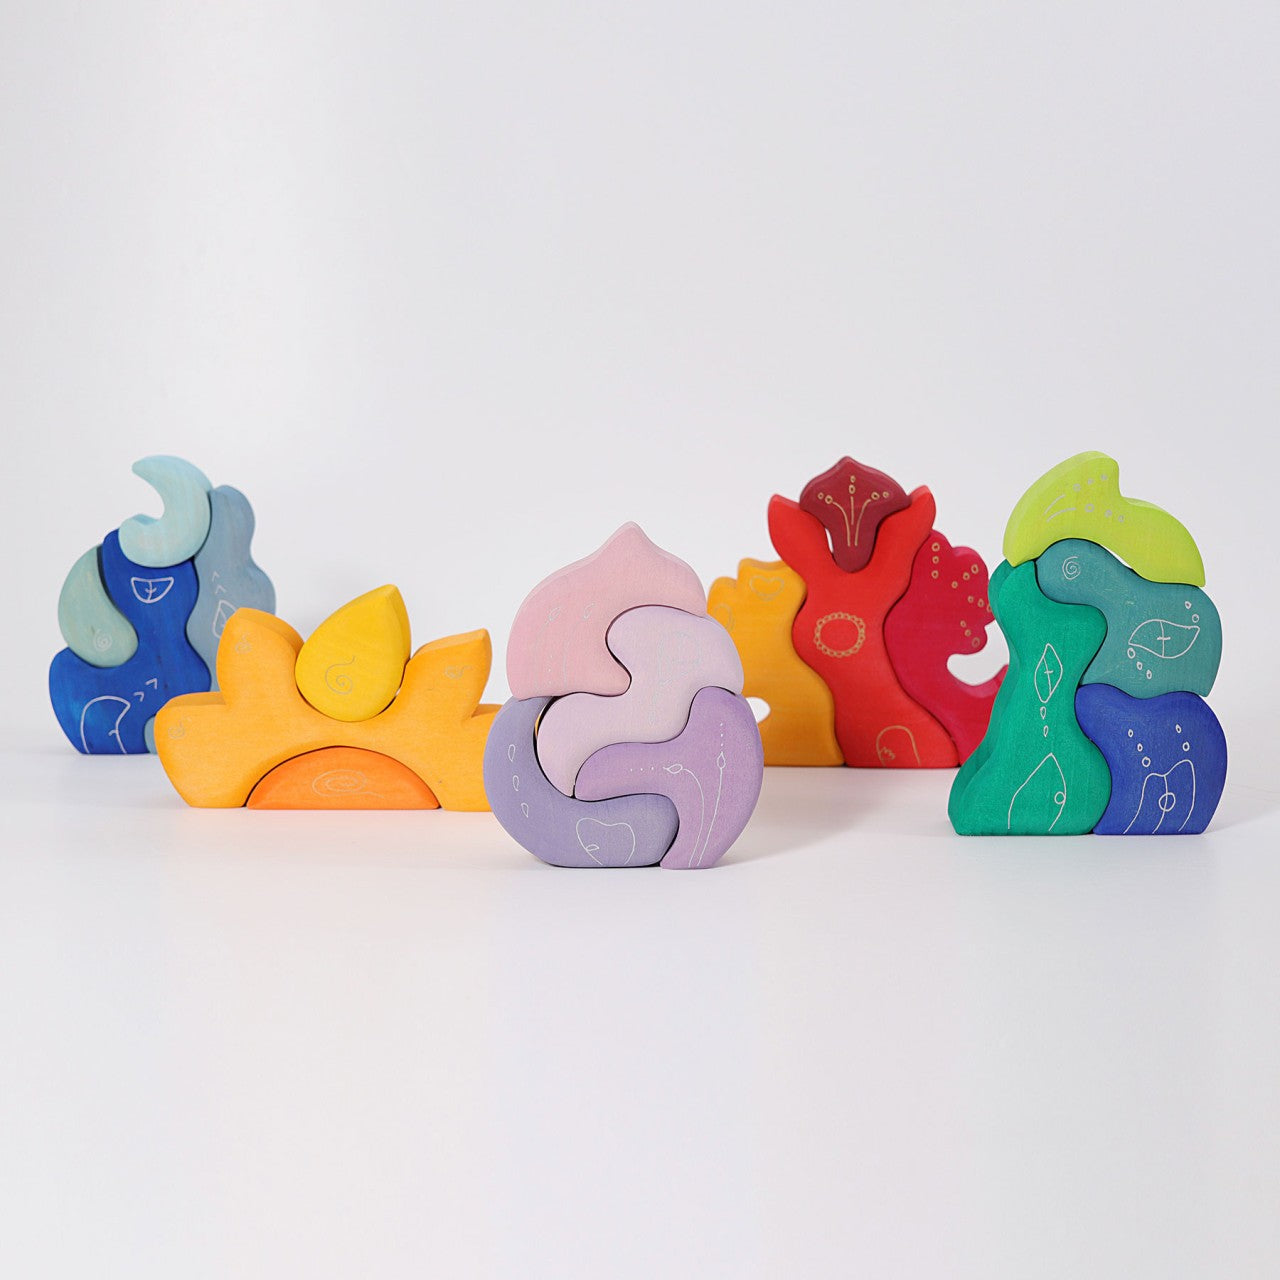 Casa Luna | 4 Pieces | Wooden Toys for Kids | Open-Ended Play